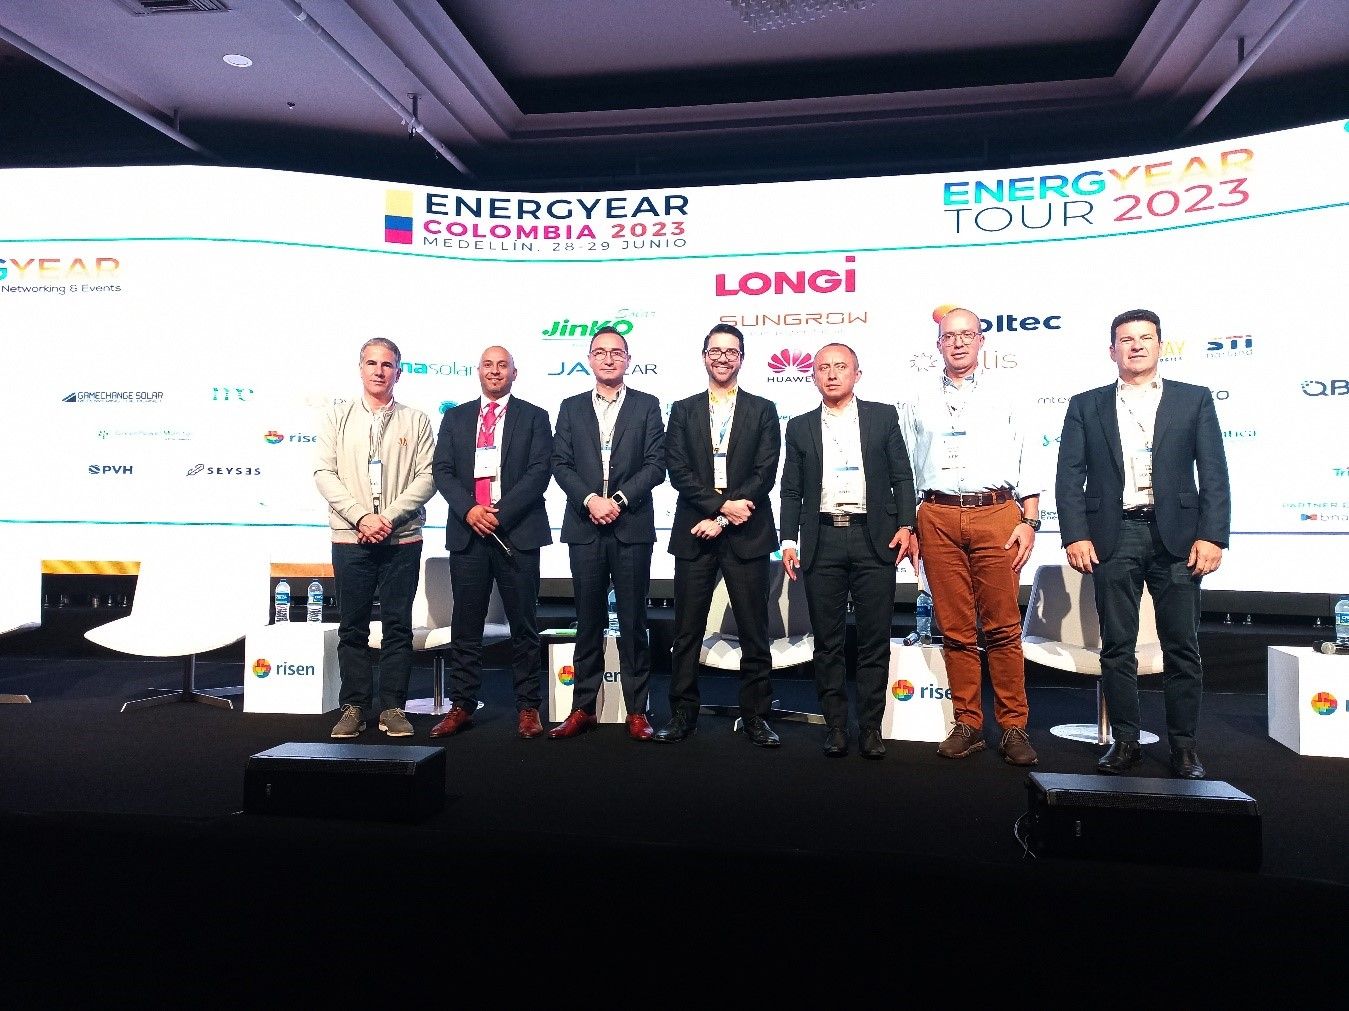 Panel of leaders at Energyear Colombia 2023, from left to right: Luis Felipe Vélez, VP and Commercial Leader, Celsia; Ivan Reyes, Head of Utility Mexico, Colombia & Caribbean, LONGi; Jhon Castillo, Commercial Leader, AES Colombia; Ricardo León Tobón, Business Development Specialist, ISA Intercolombia; Edwin Cruz, Deputy Director, ANDEG; Alberto Mejía, Wholesale Energy Market Manager, EPM; Raúl Morales, CEO, Soltec